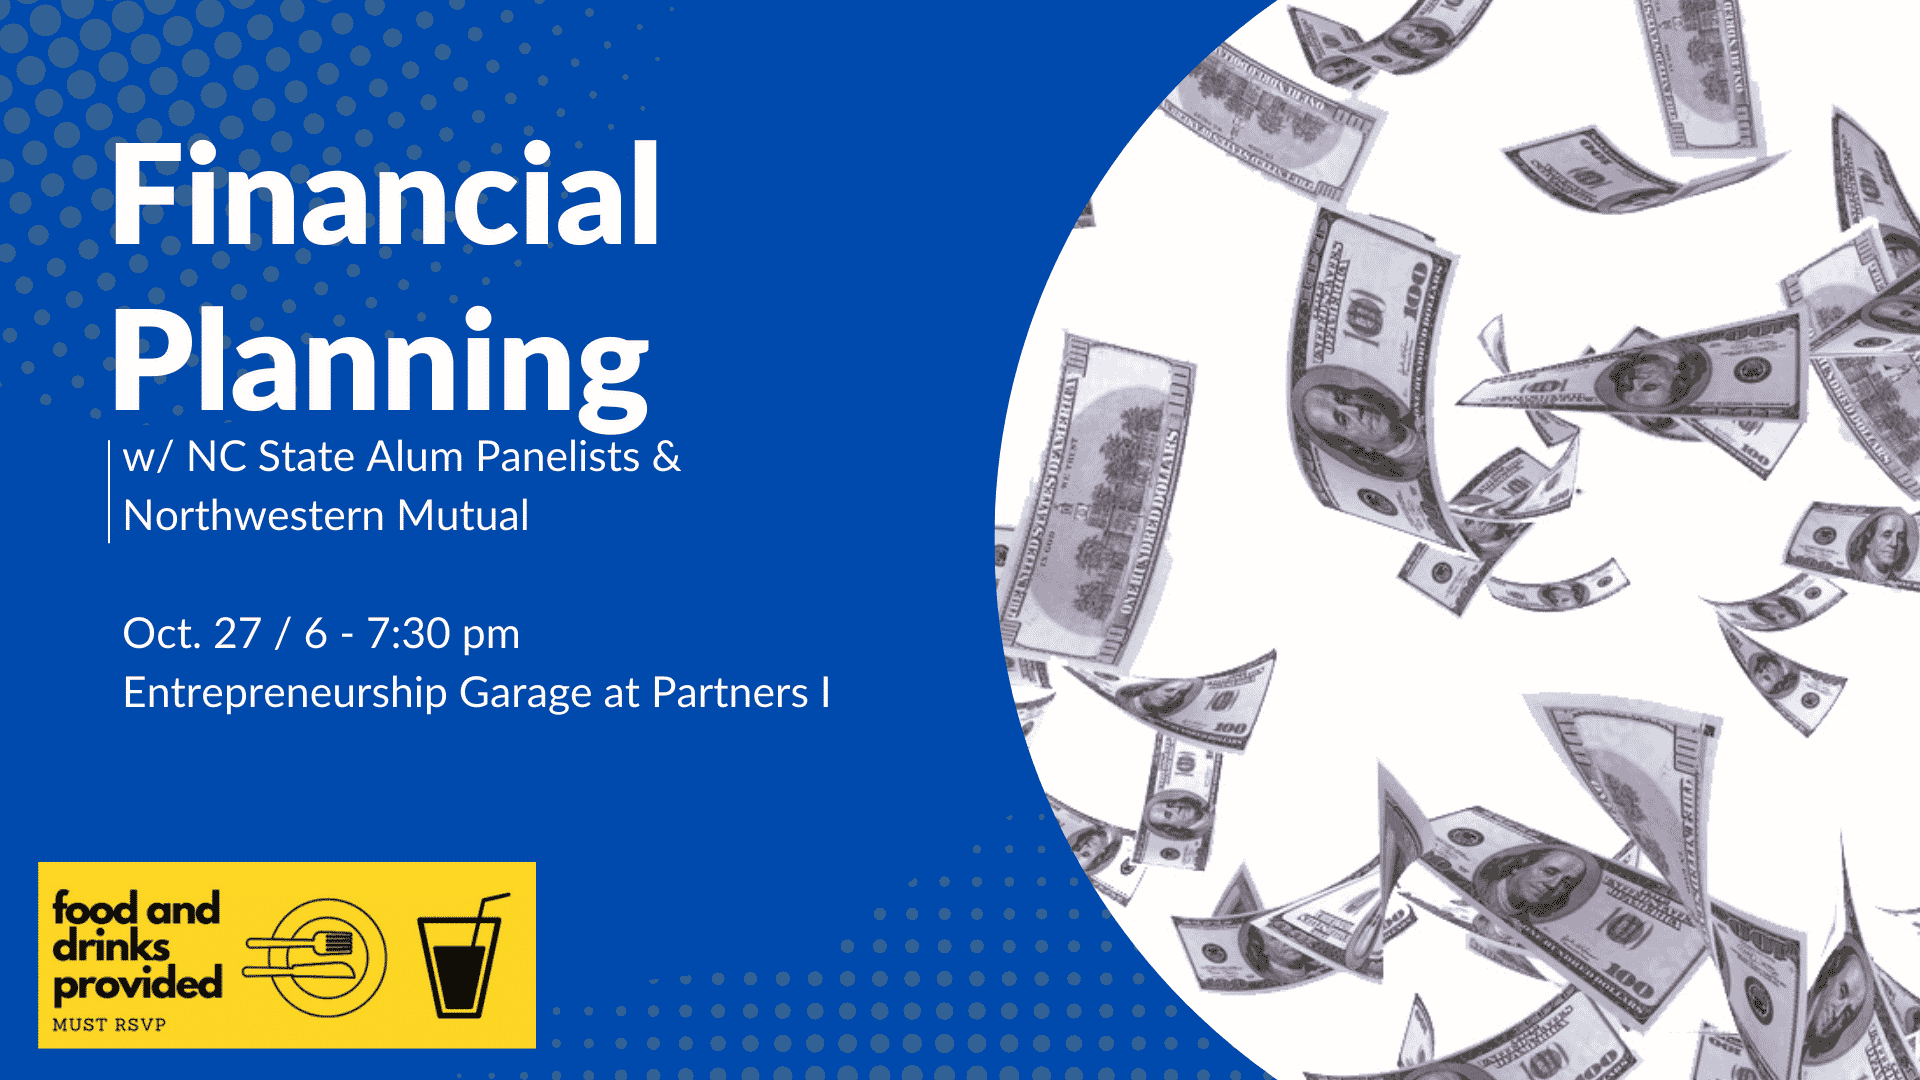 financial planning workshop on october 27 from 6 to 7:30 pm